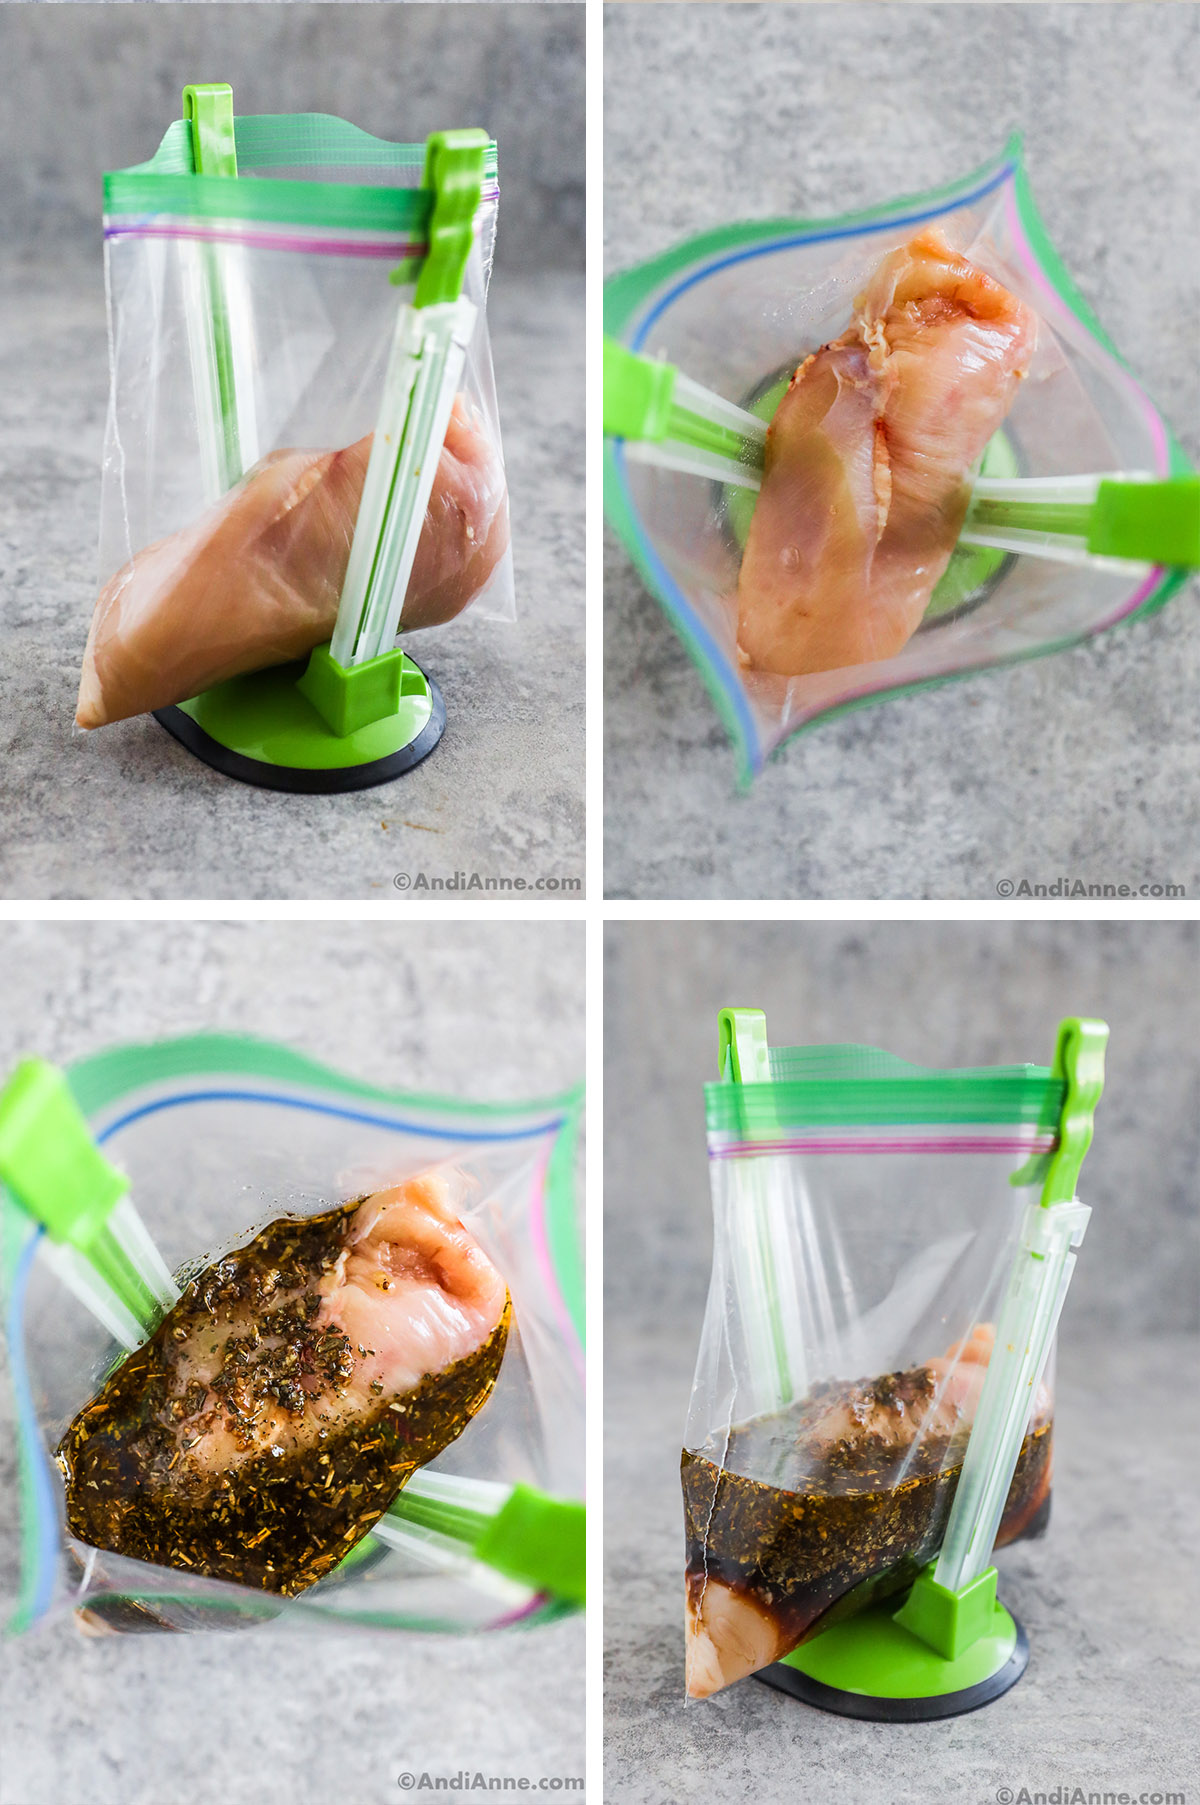 Four images grouped together, First is raw chicken breast in ziploc bag with a stand holding it up. Second is looking down into the bag. Third is marinade ingredients dumped in. Fourth is side angle of chicken with marinade in plastic bag with green stand.